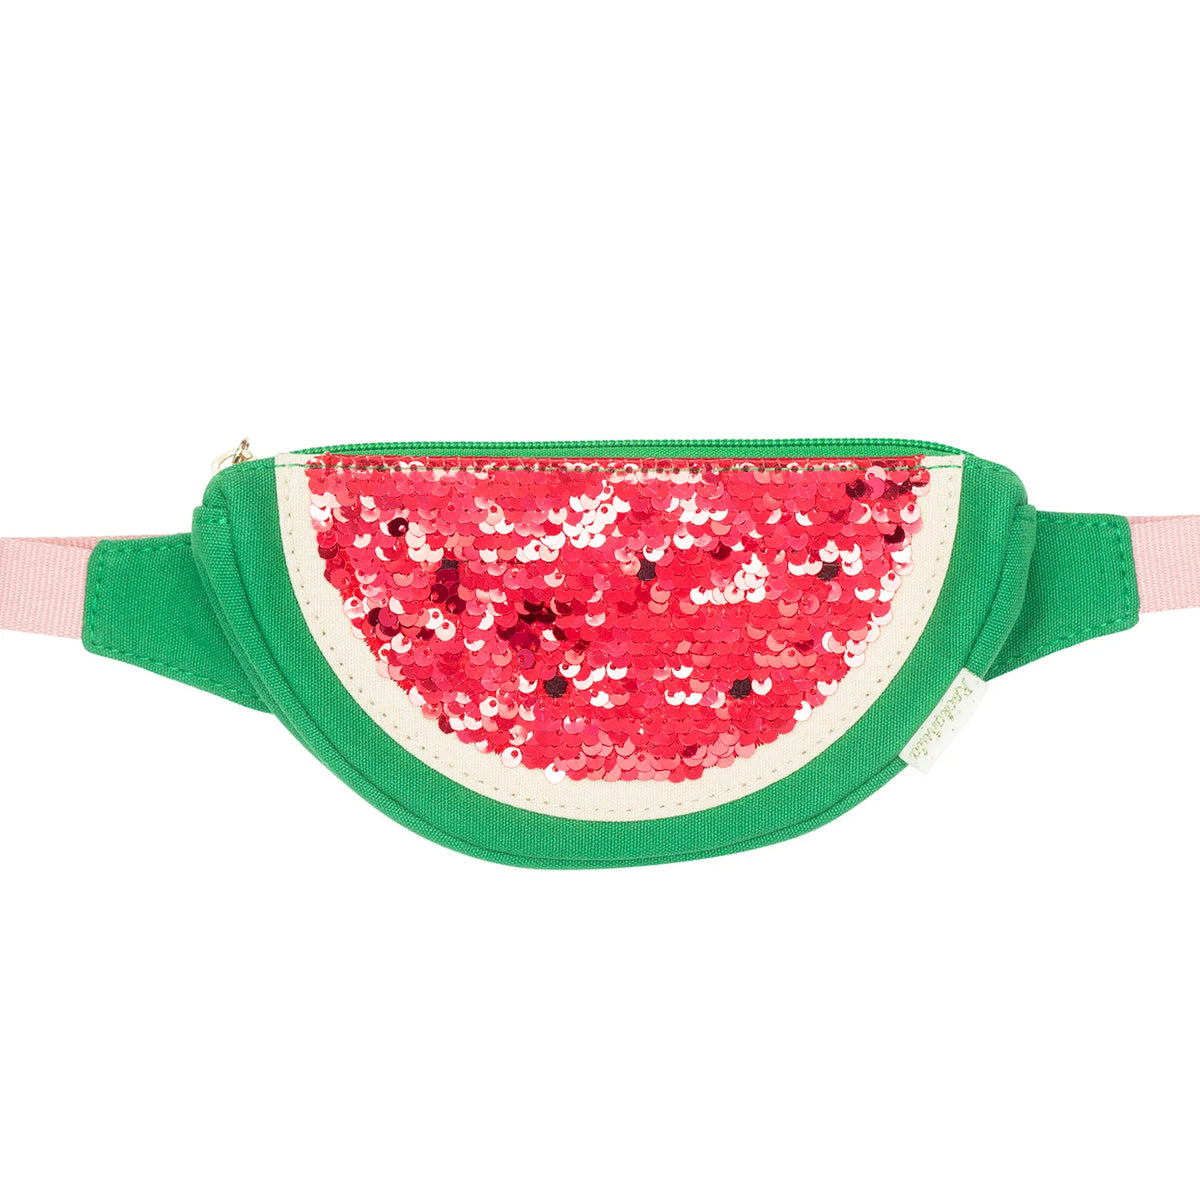 Sequin Watermelon Fanny Pack Cover